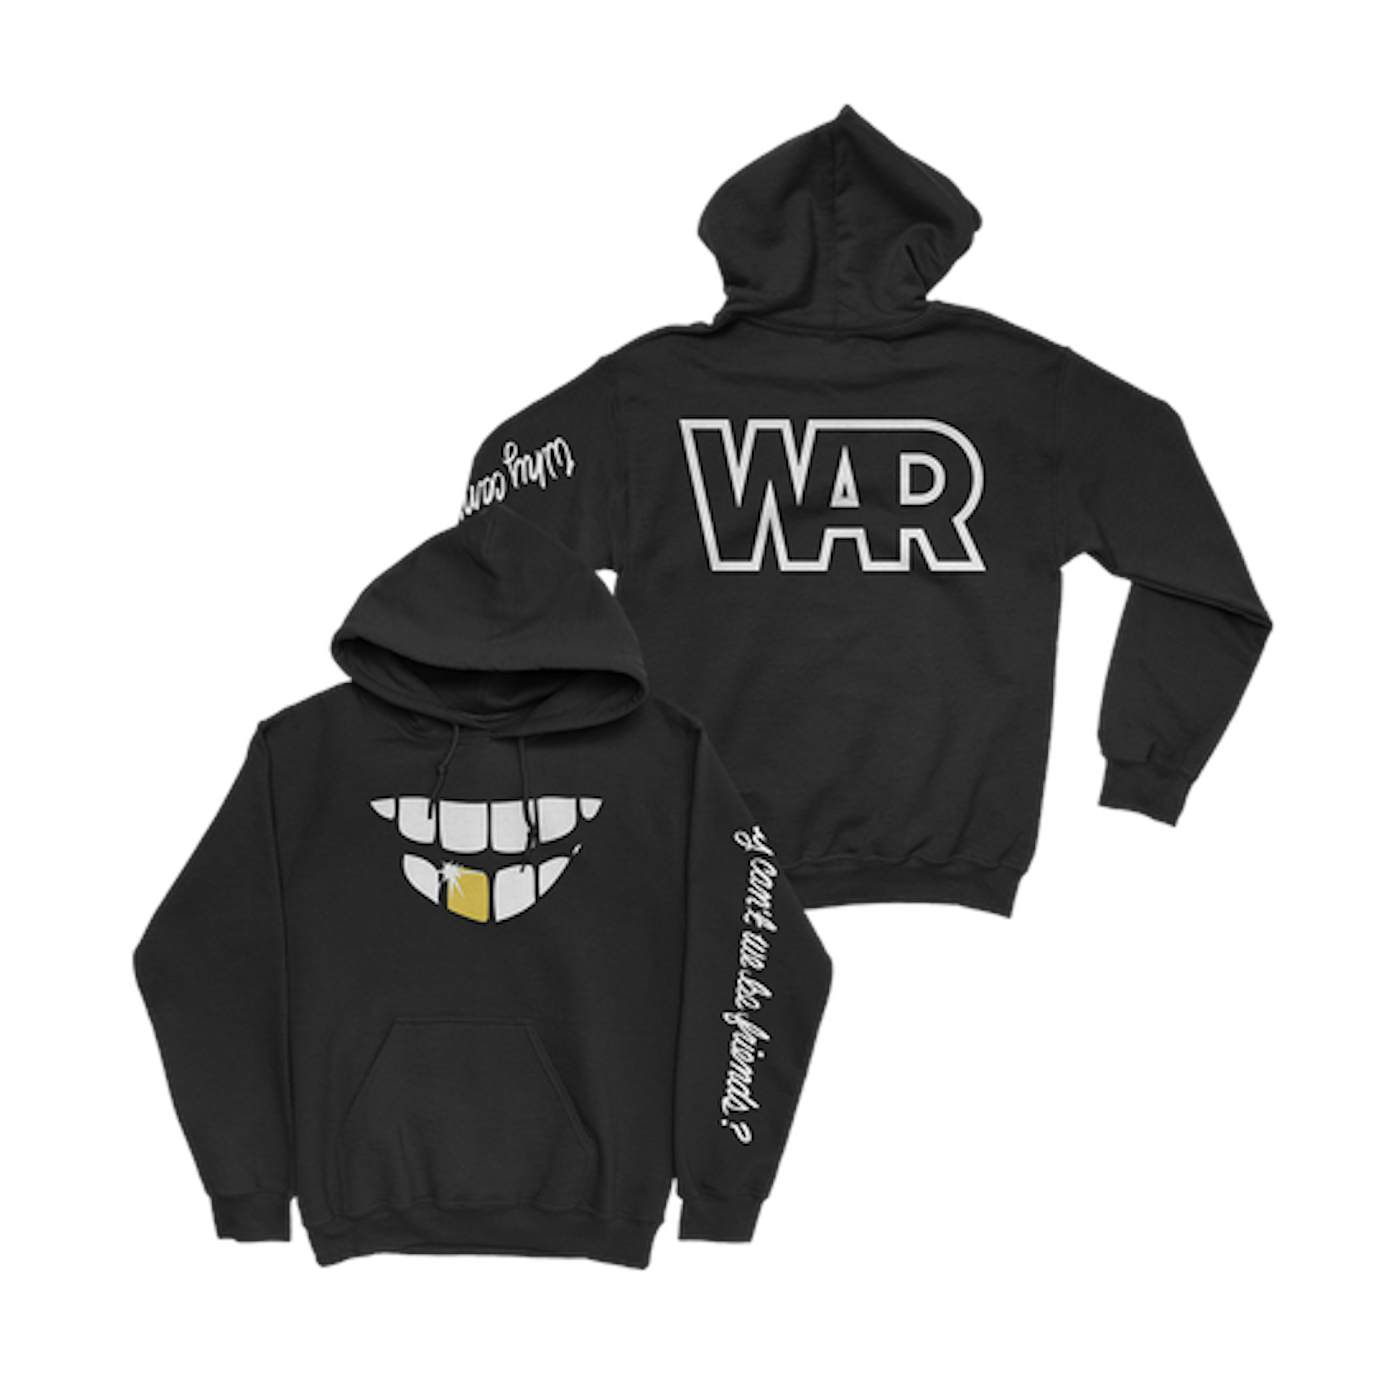 War Why Can’t We? Hoodie